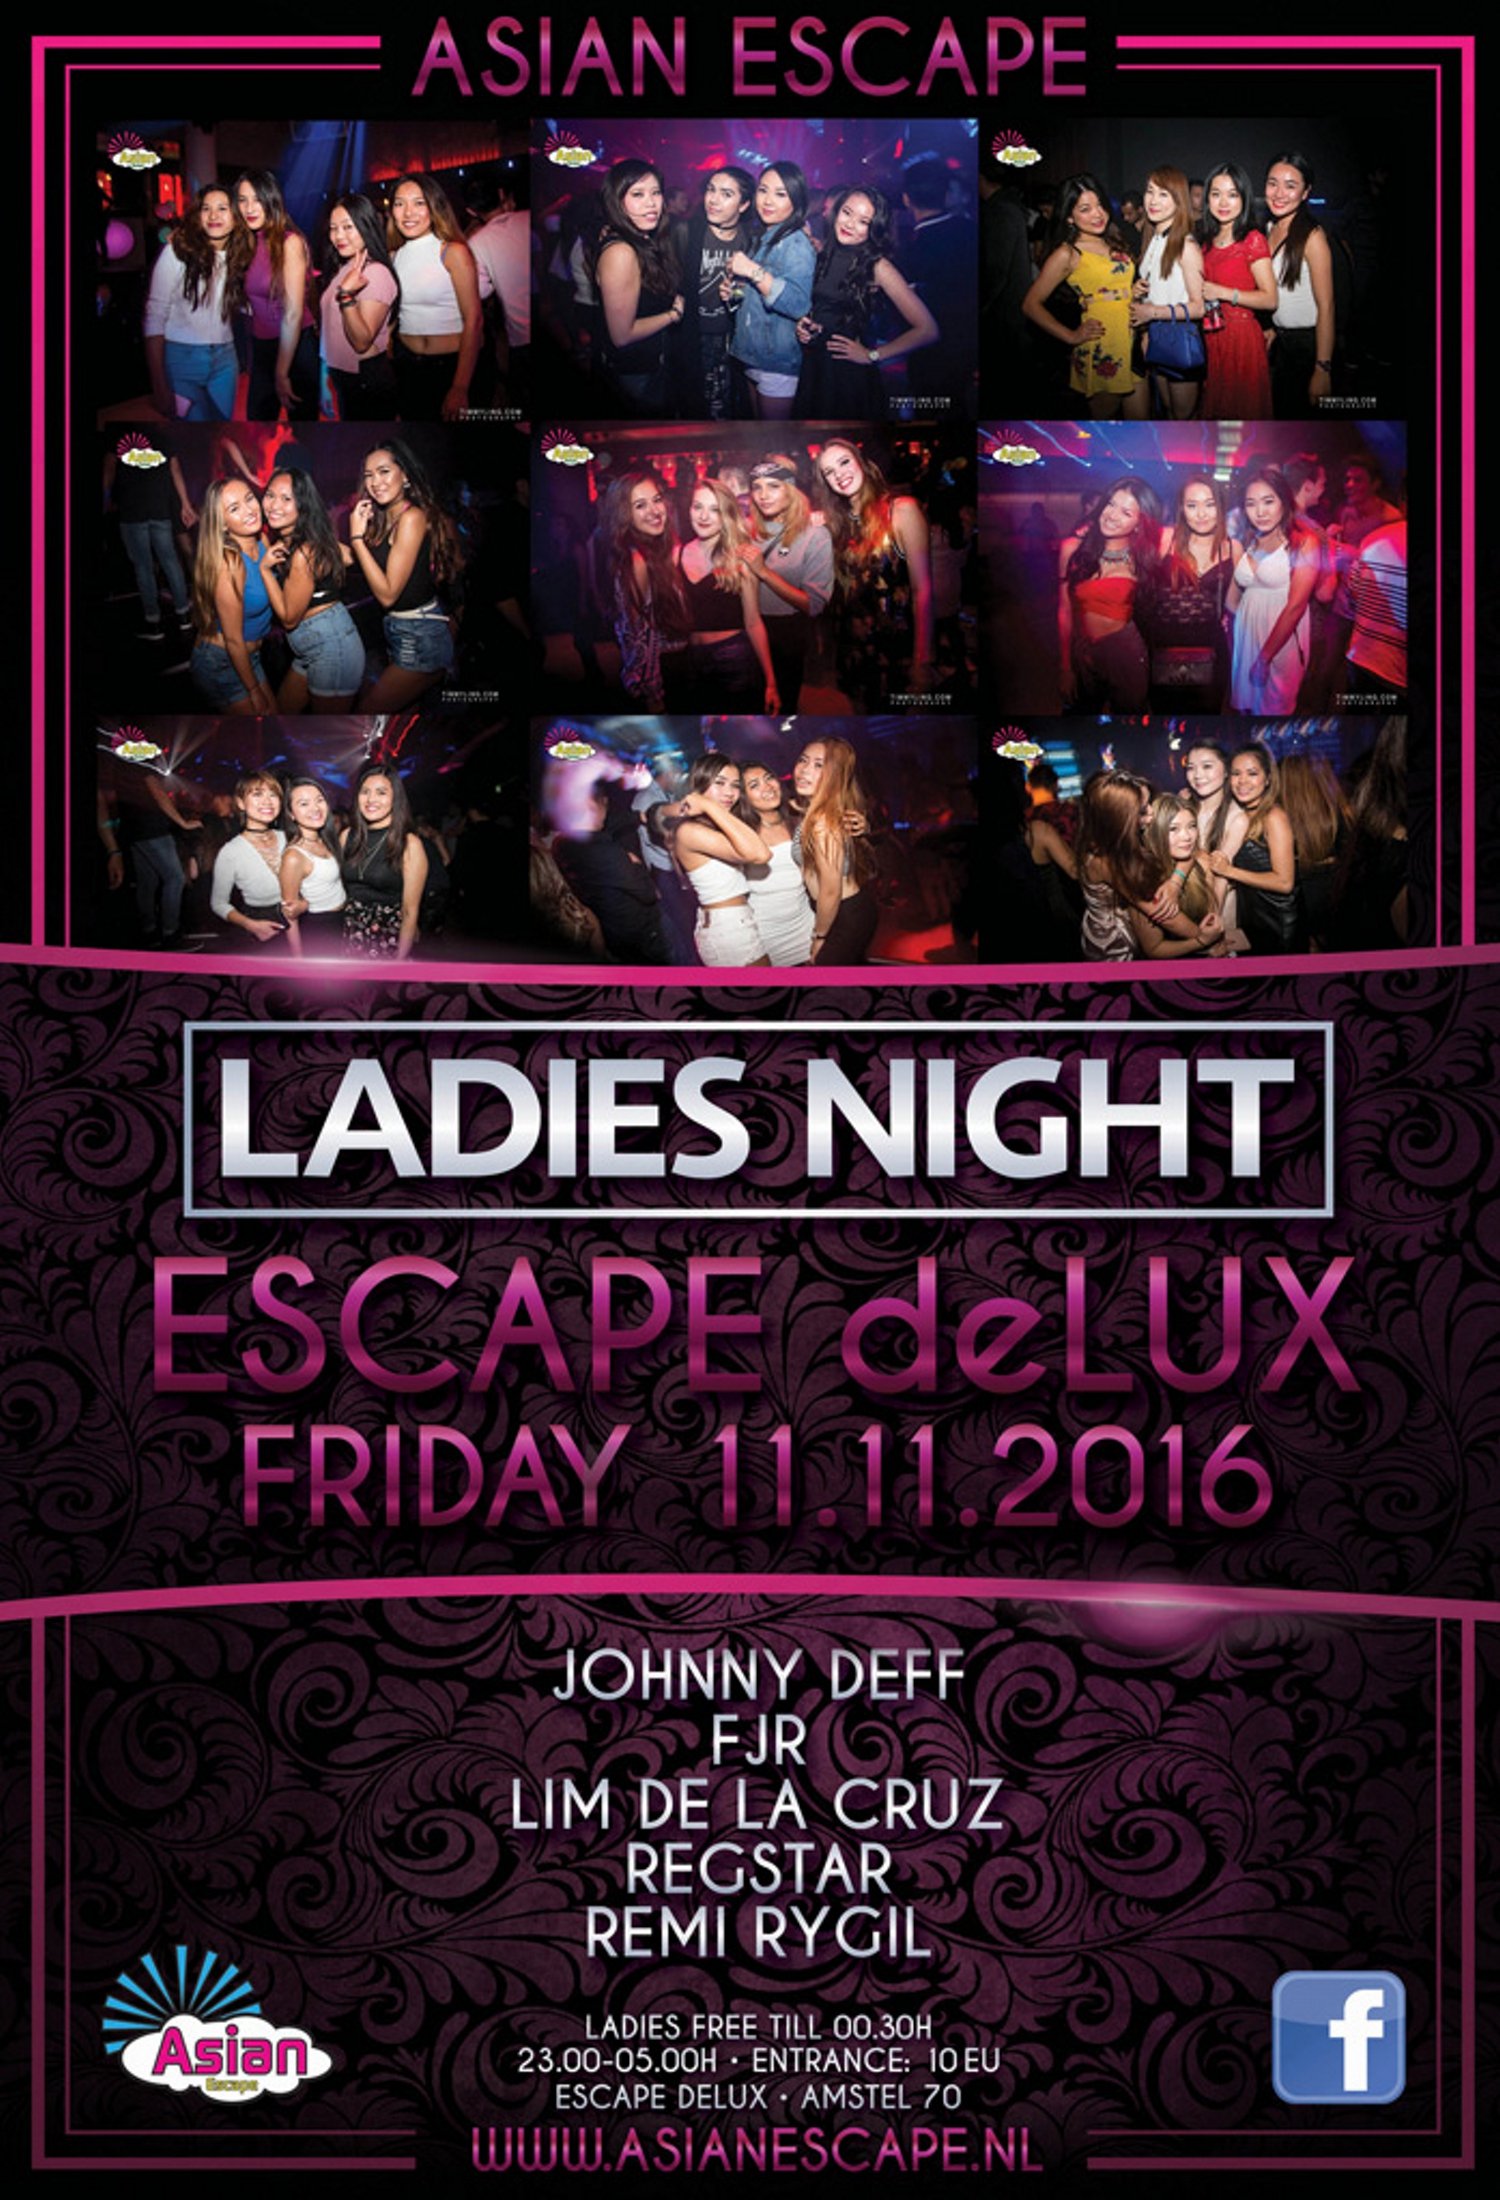 Ladies Night by Asian Escape